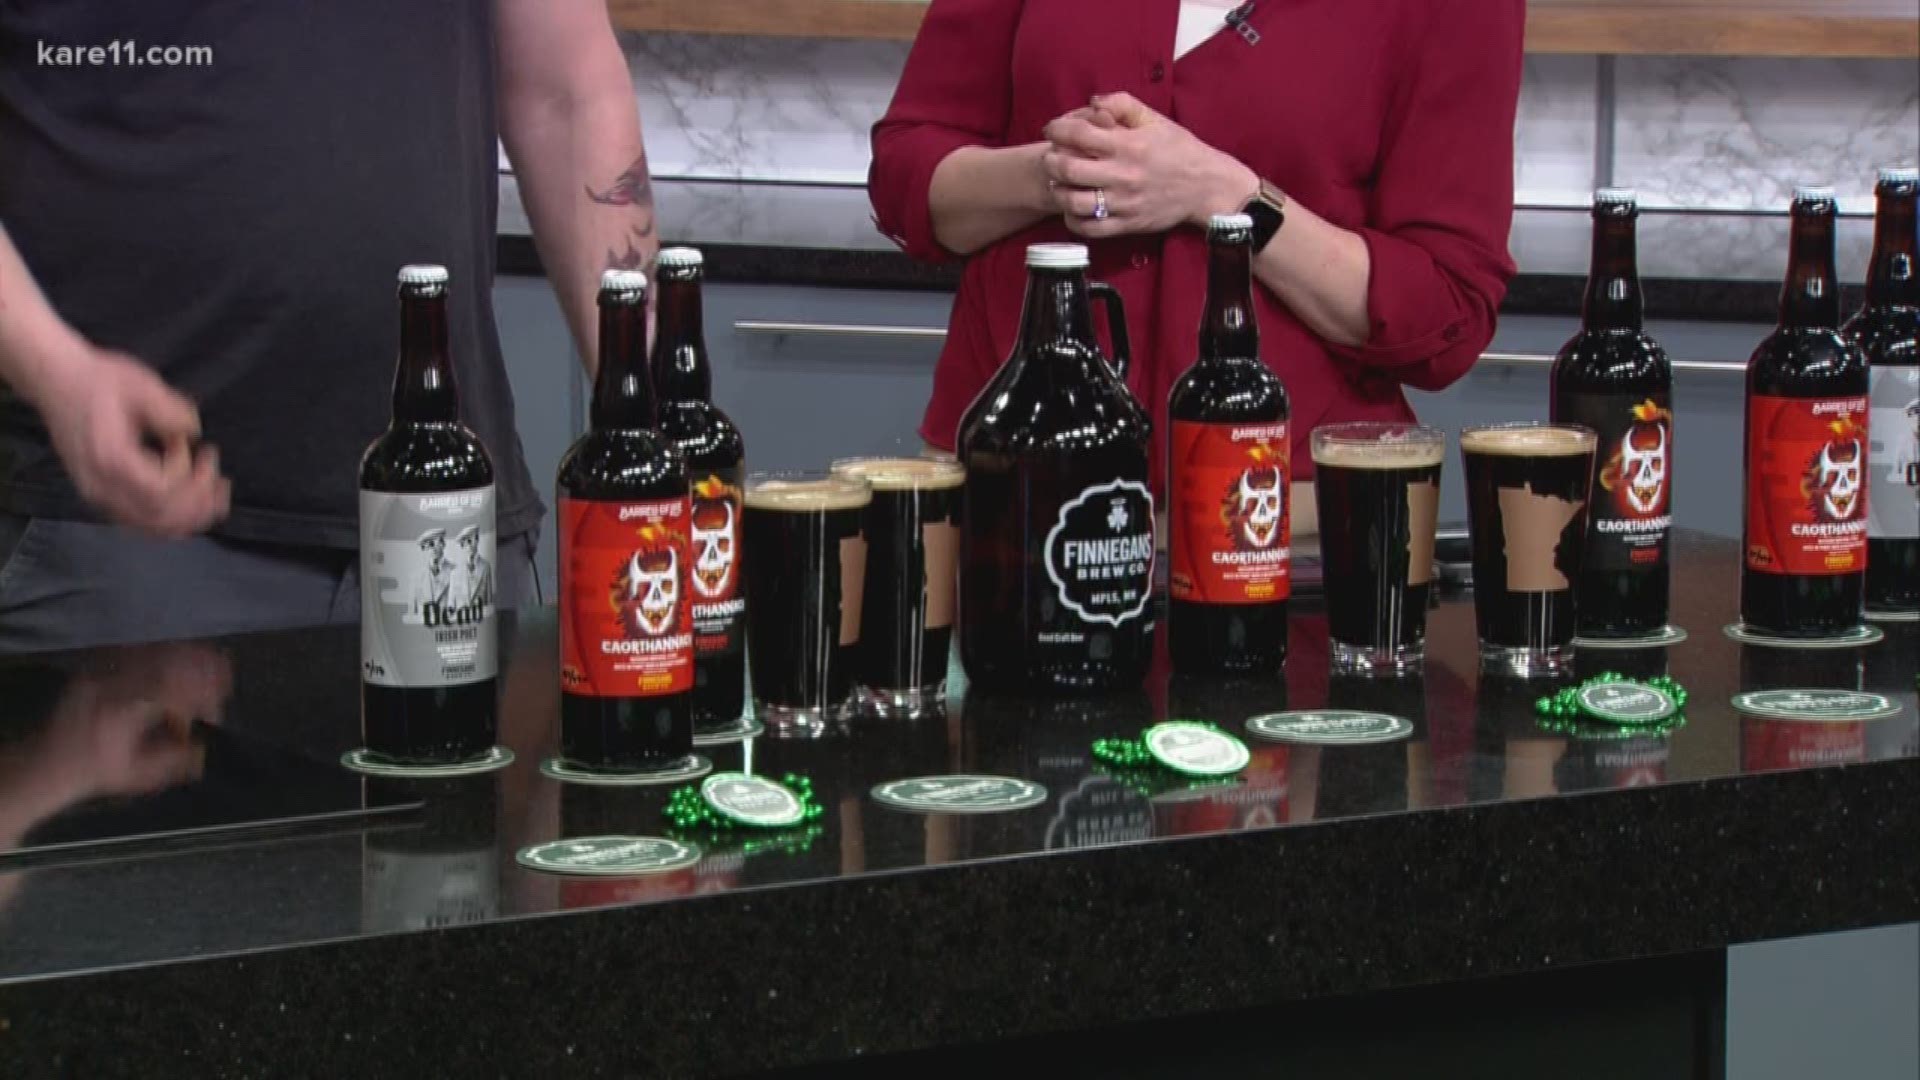 Finnegans Brew Company, the Minneapolis-based brewery with a mission to do good, will unveil a new dark beer each day during what they’re calling Dark Week, from Jan. 13-19.